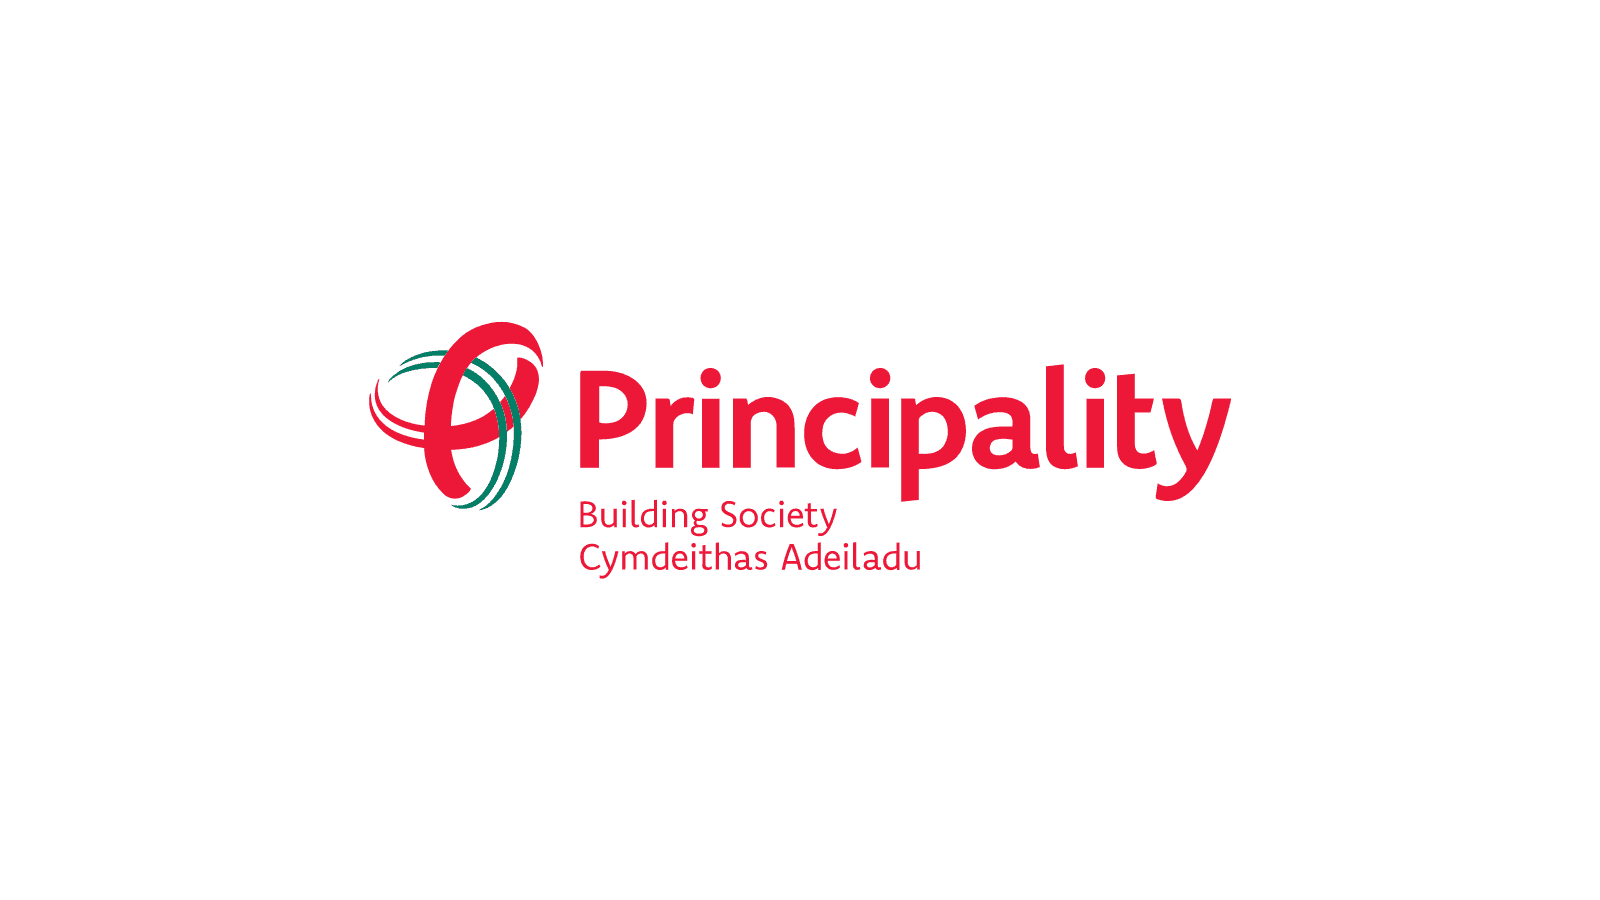 Visit the Principality Website